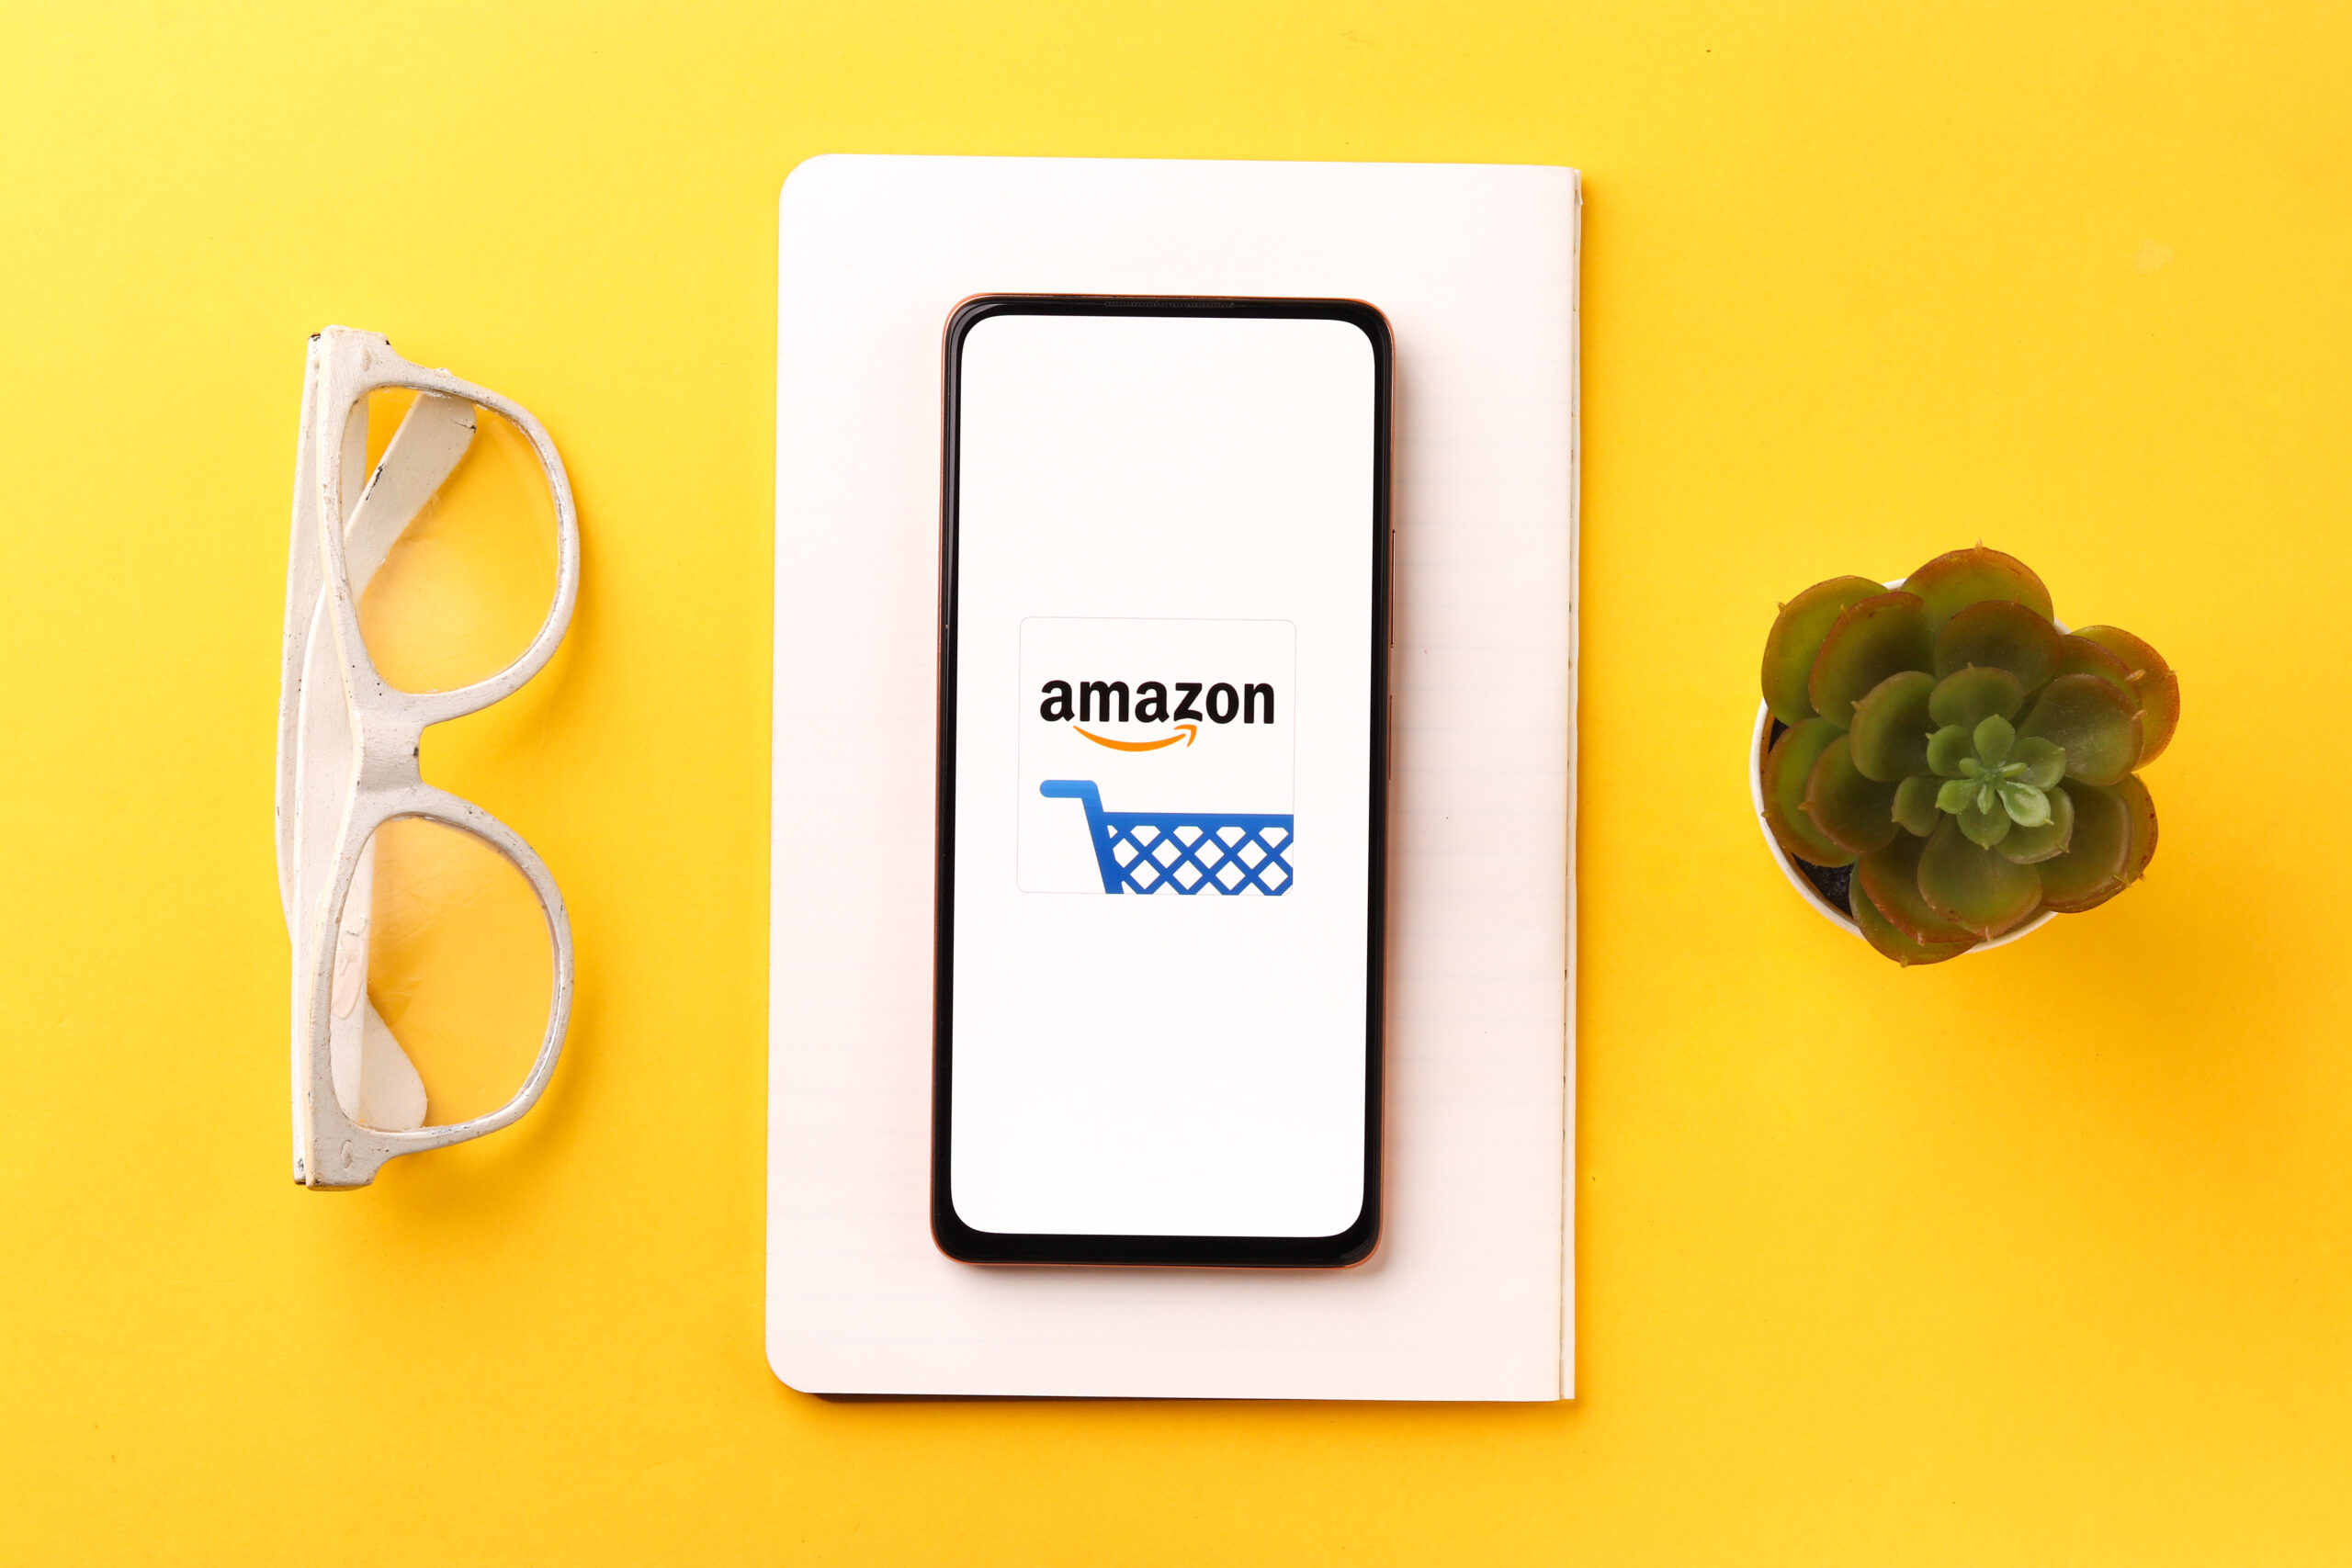 Amazon-Pricing-Strategy-Smartphone-on-Yellow-Desk-With-Glasses-And-Plant